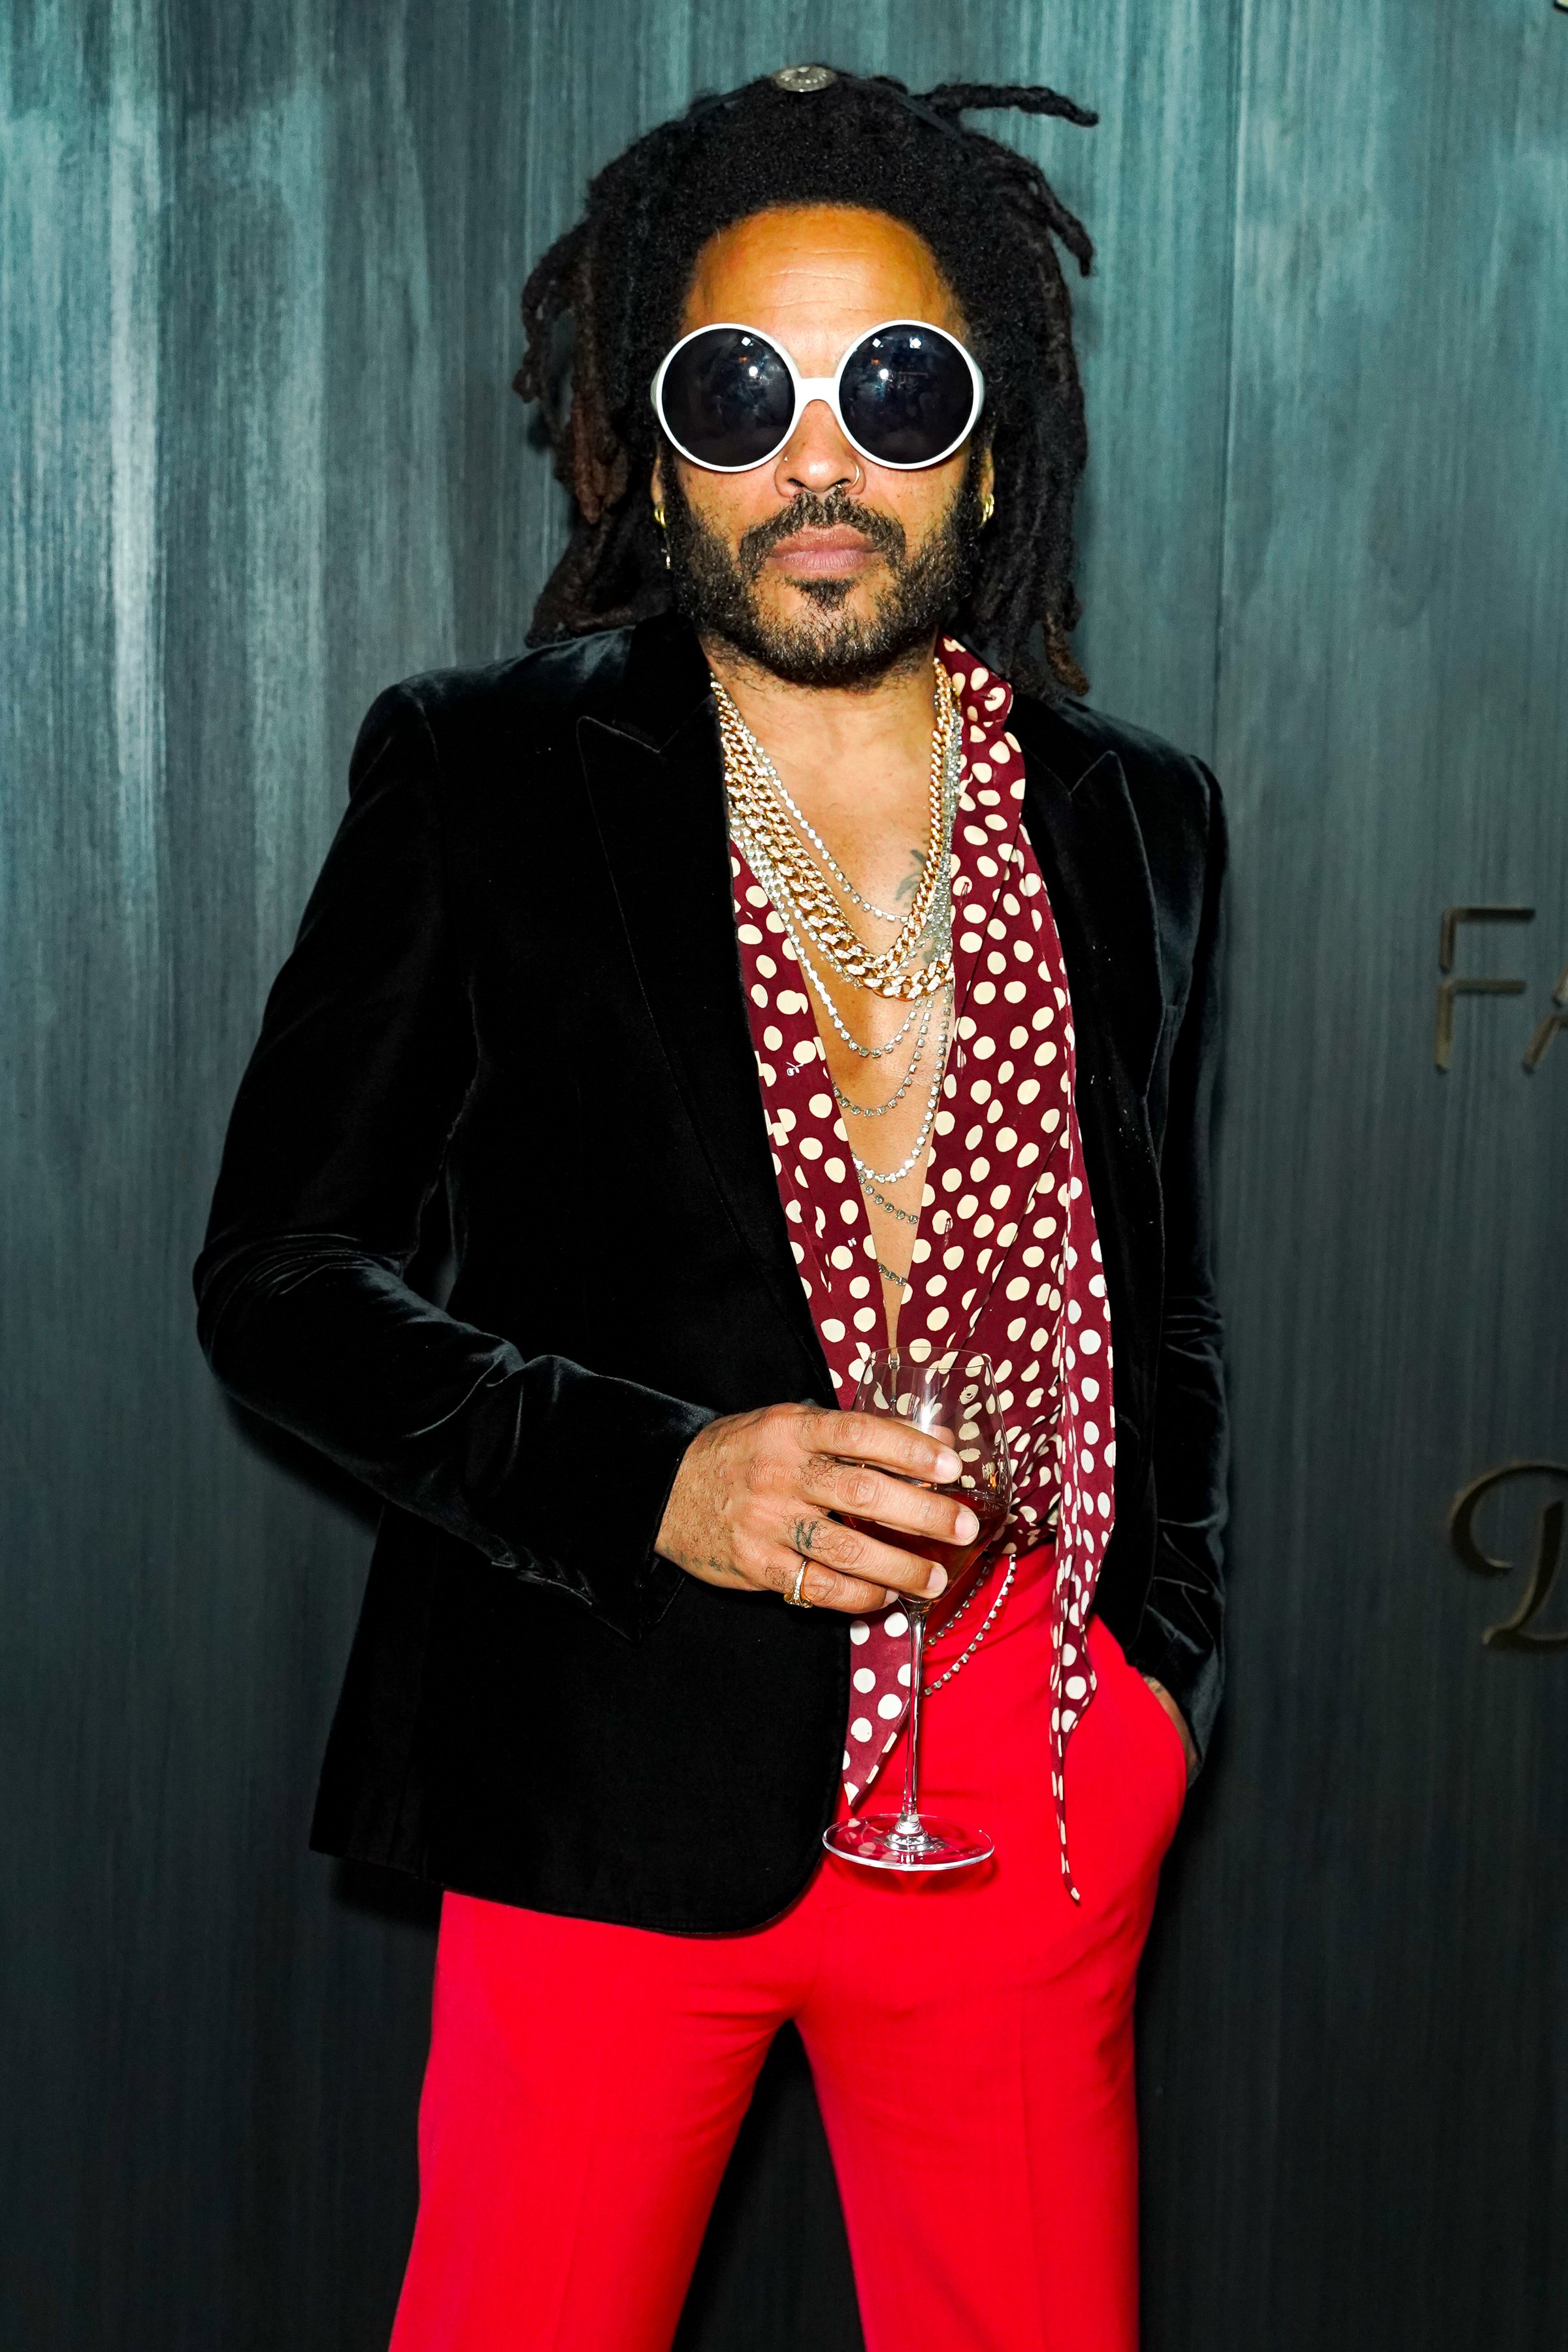 Lenny Kravitz attends Dom Perignon Last Supper Party on December 4, 2019 in Miami, Florida. | Source: Getty Images